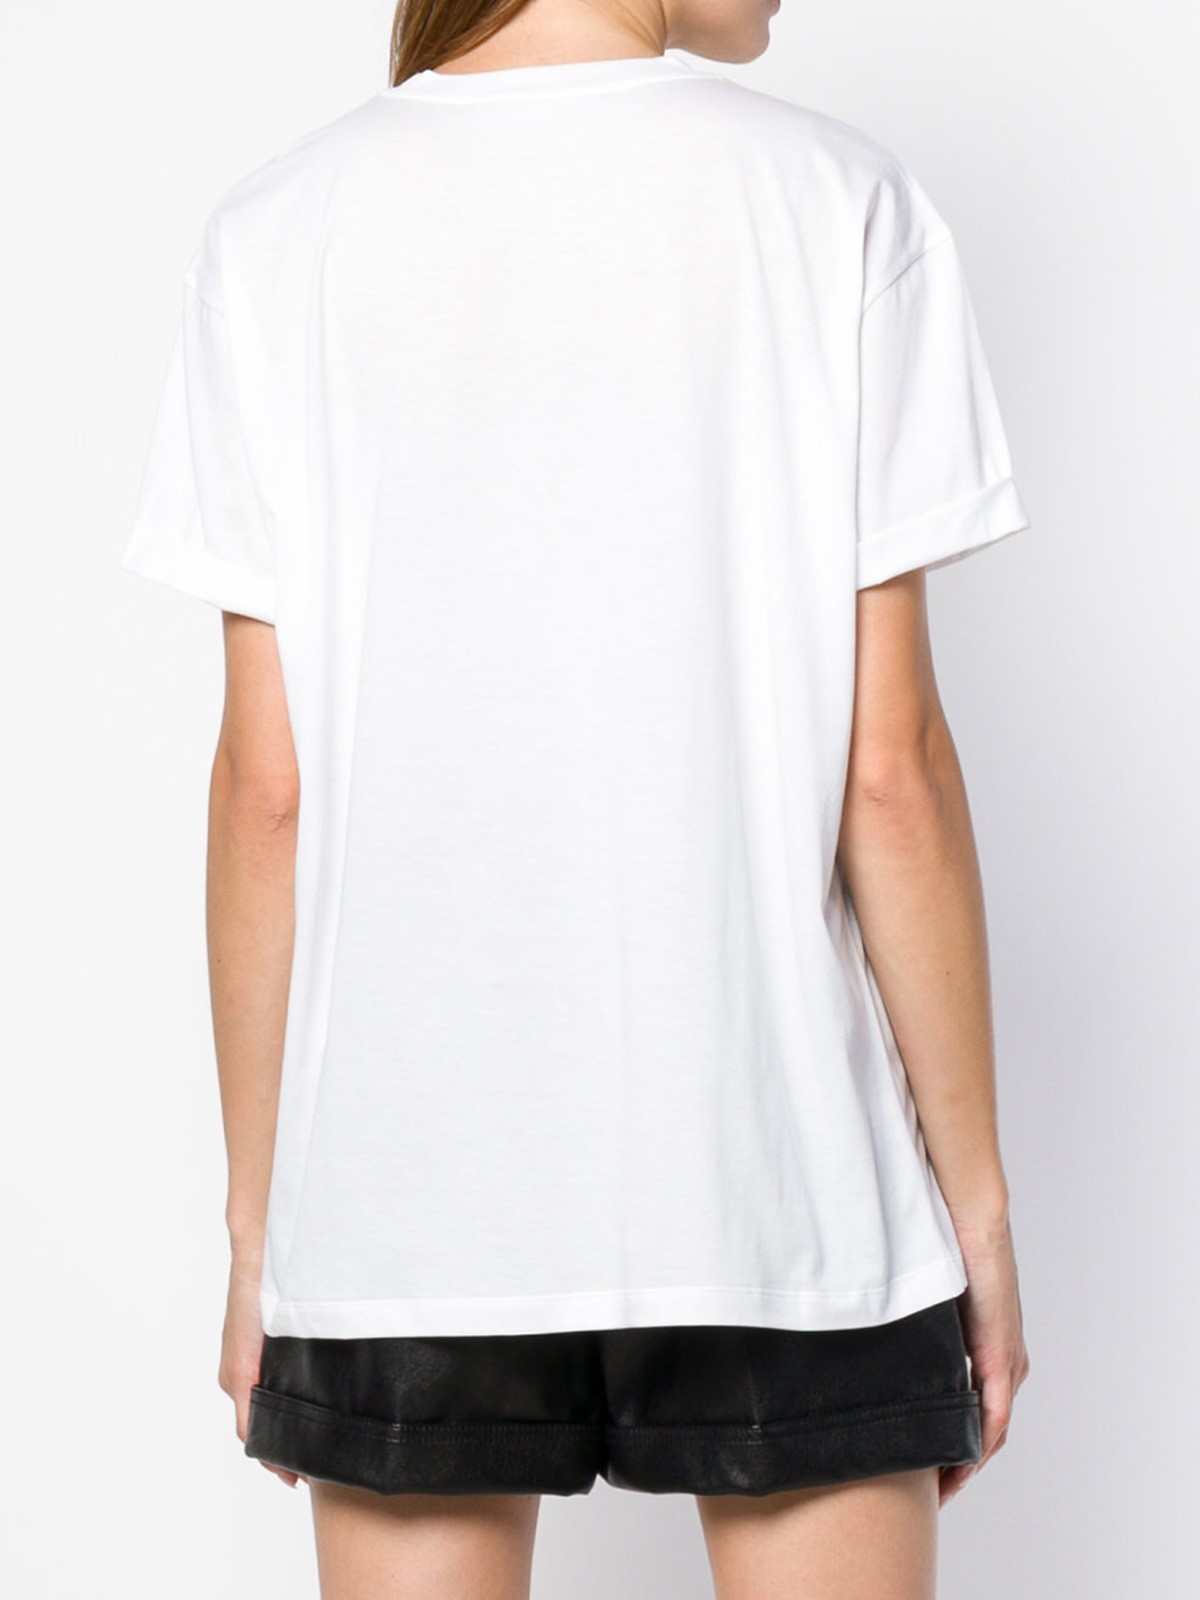 stella mccartney STAR T-SHIRT available on montiboutique.com - 23114